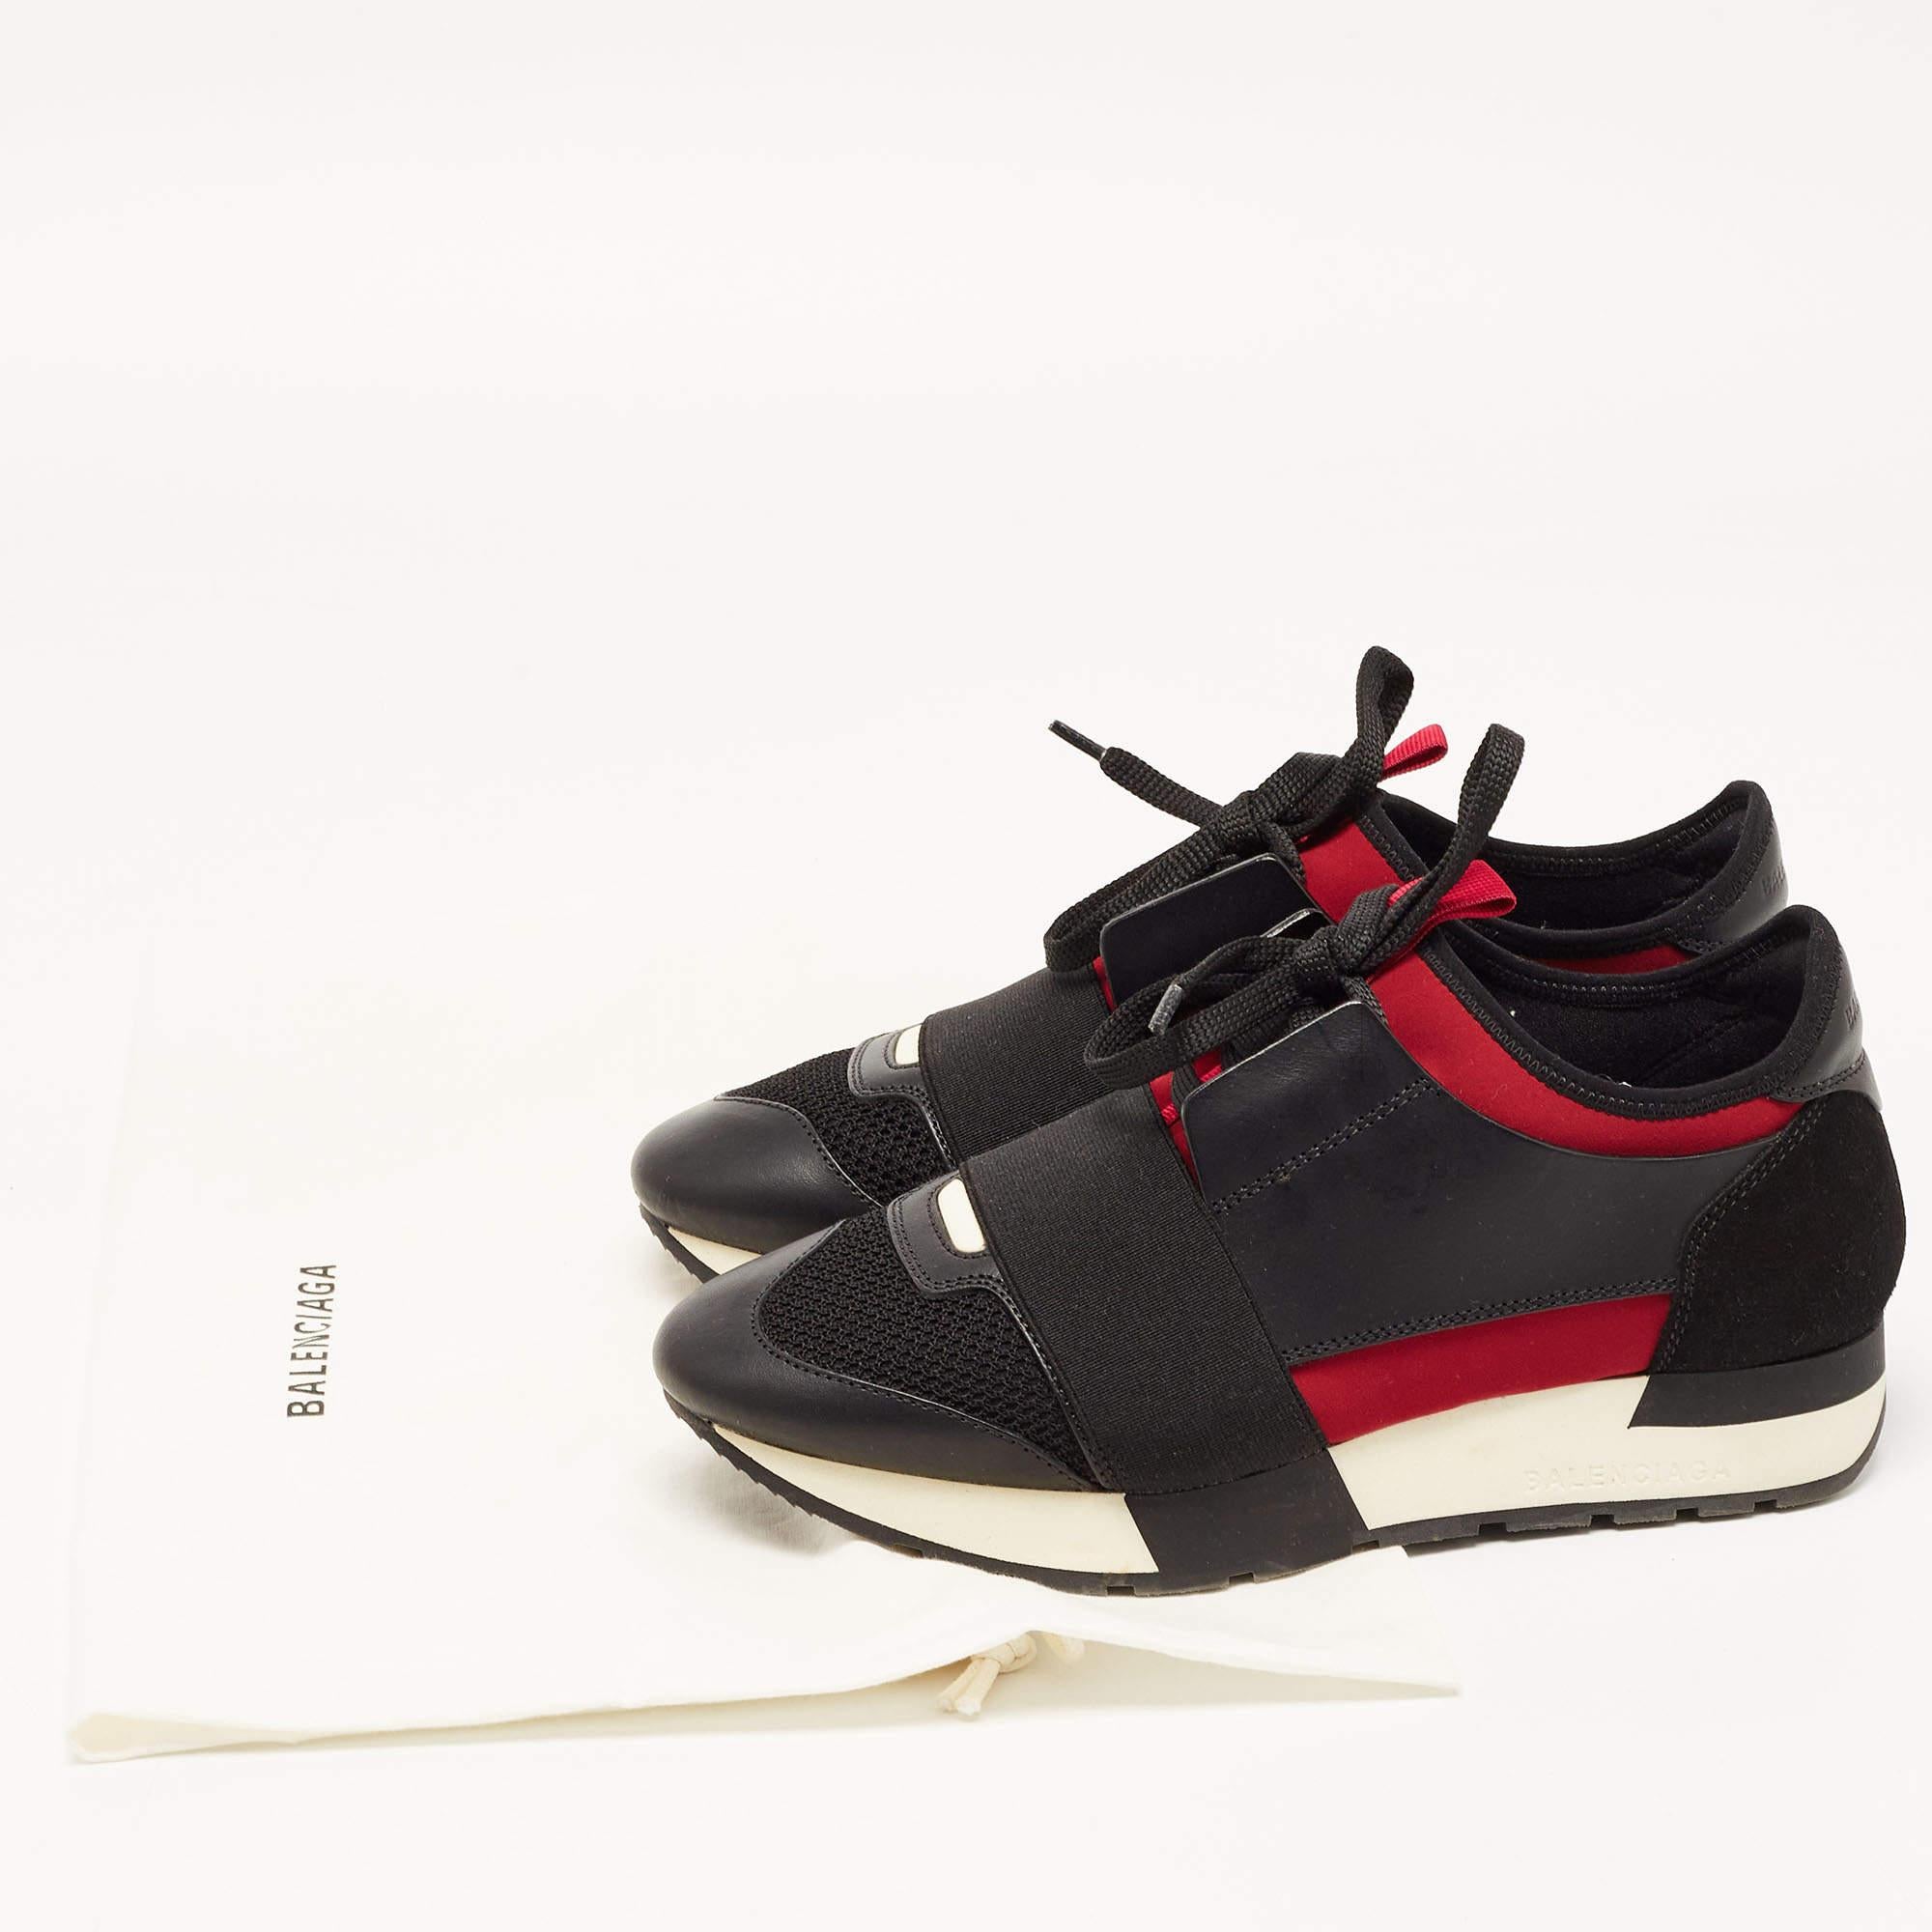 Balenciaga Black/Red Leather and Mesh Race Runner Sneakers Size 36 2